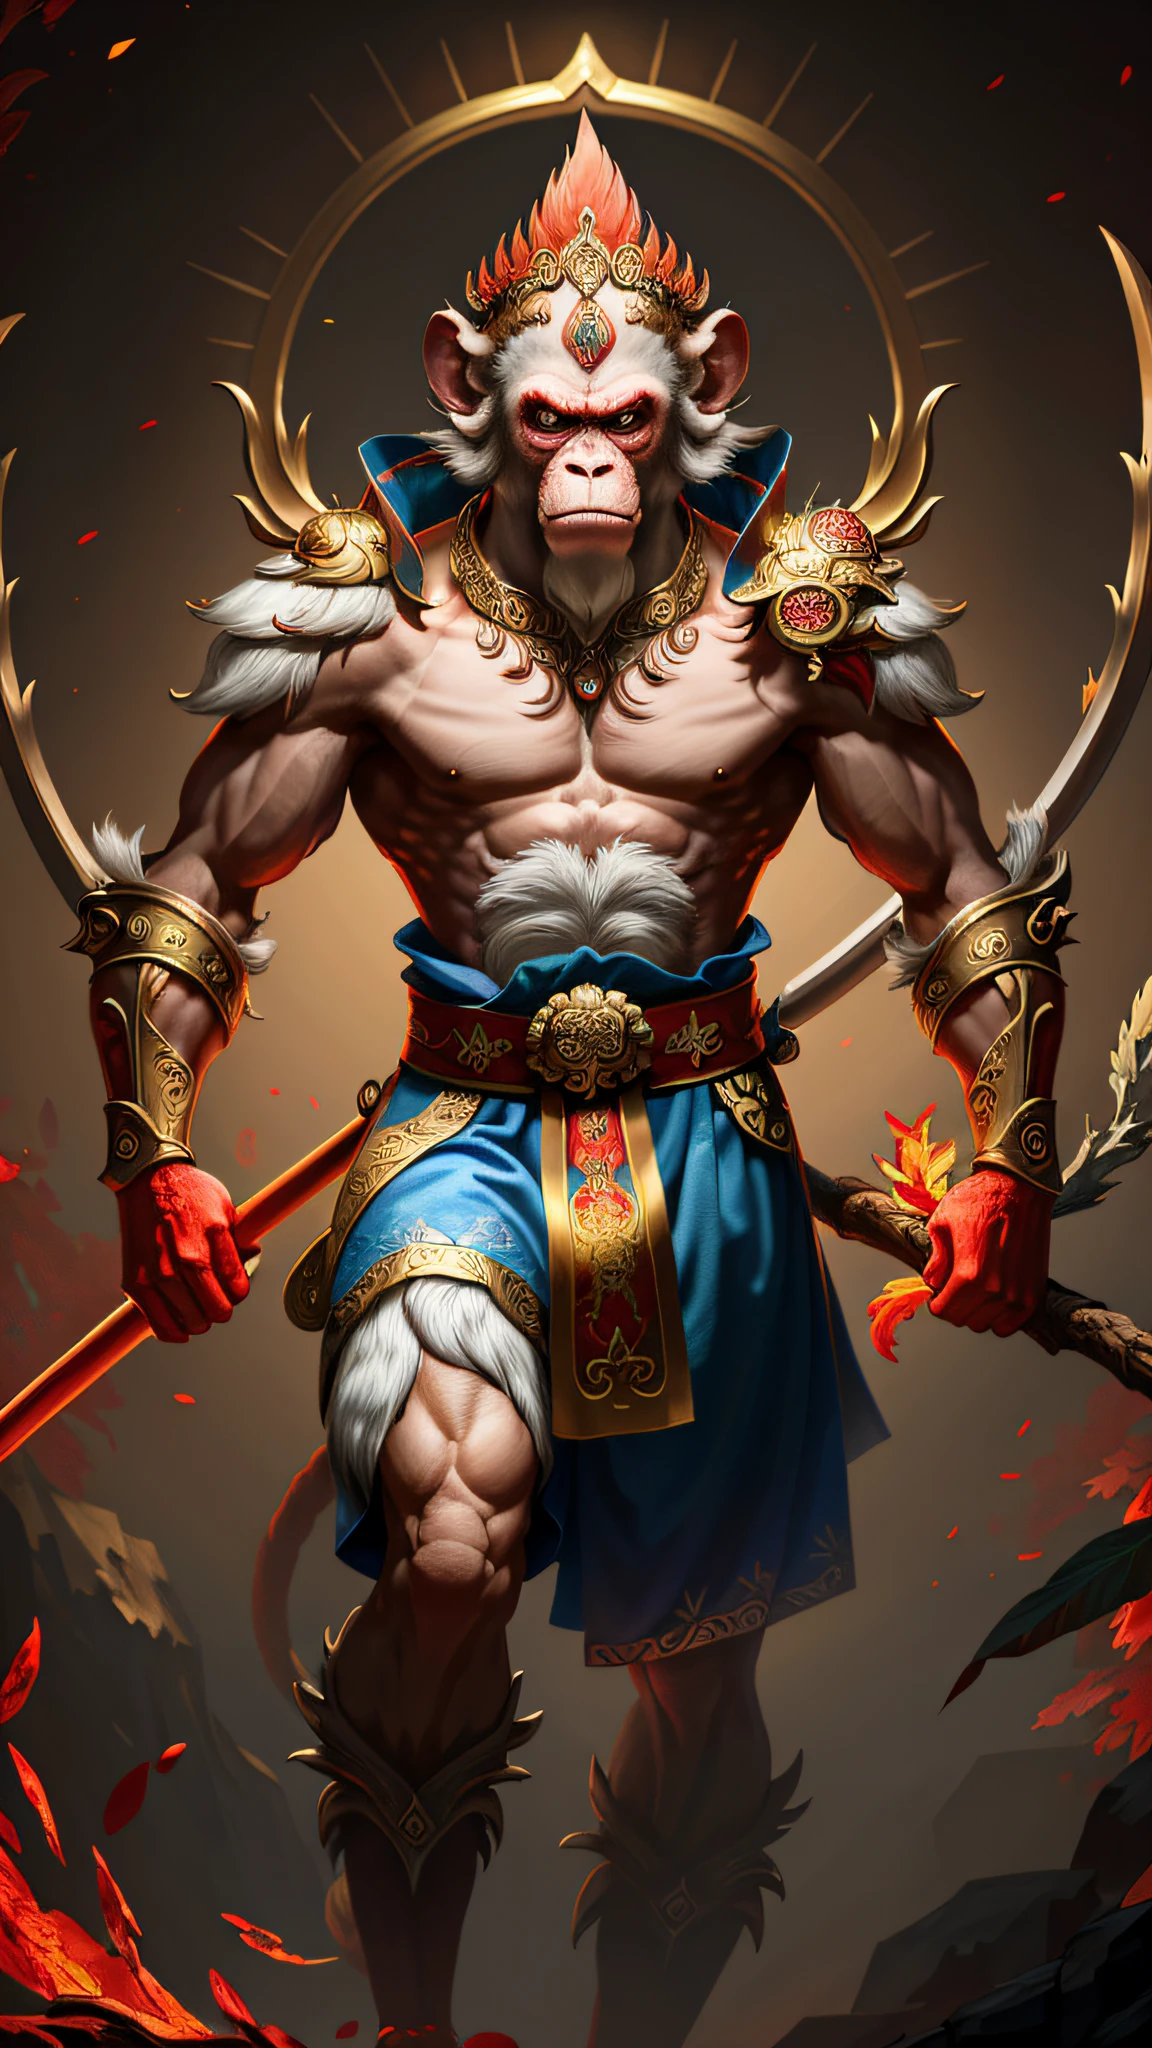 ((Masterpiece)), highest quality, high detail, super high resolution, 8k wallpaper, holding stick, Monkey King glowing red.